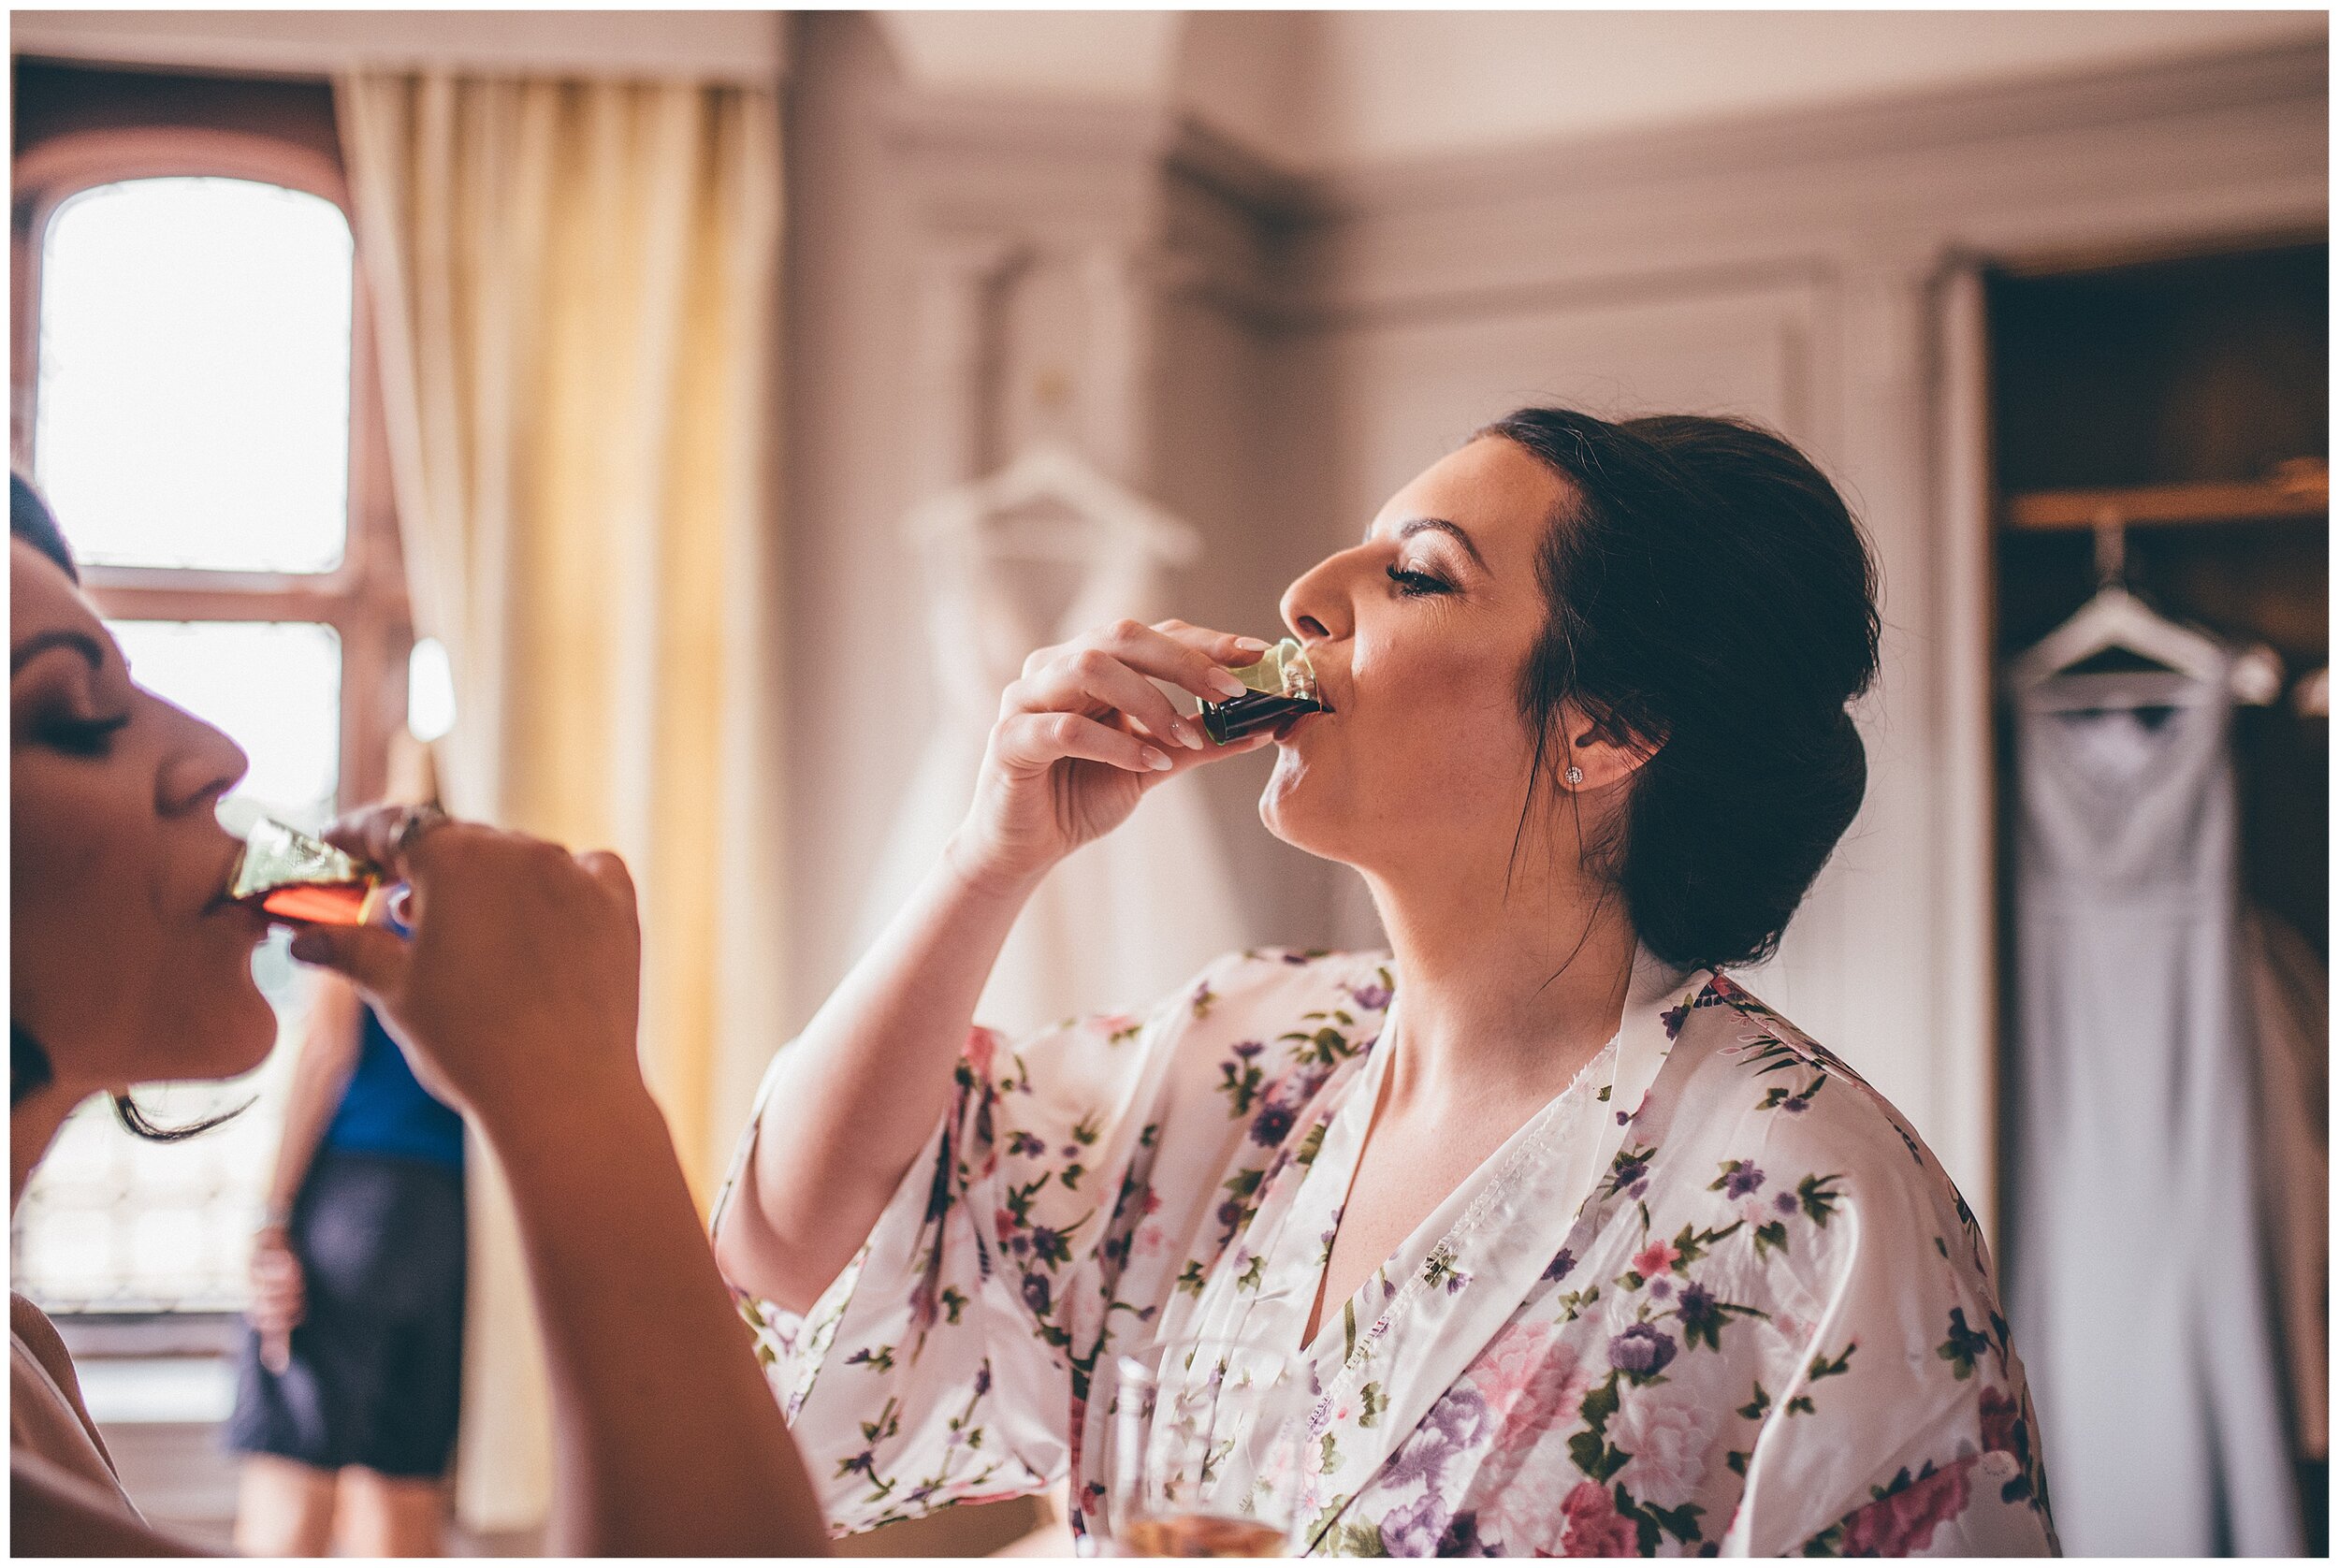 Bride does a shot of Jaegermeister on her wedding morning